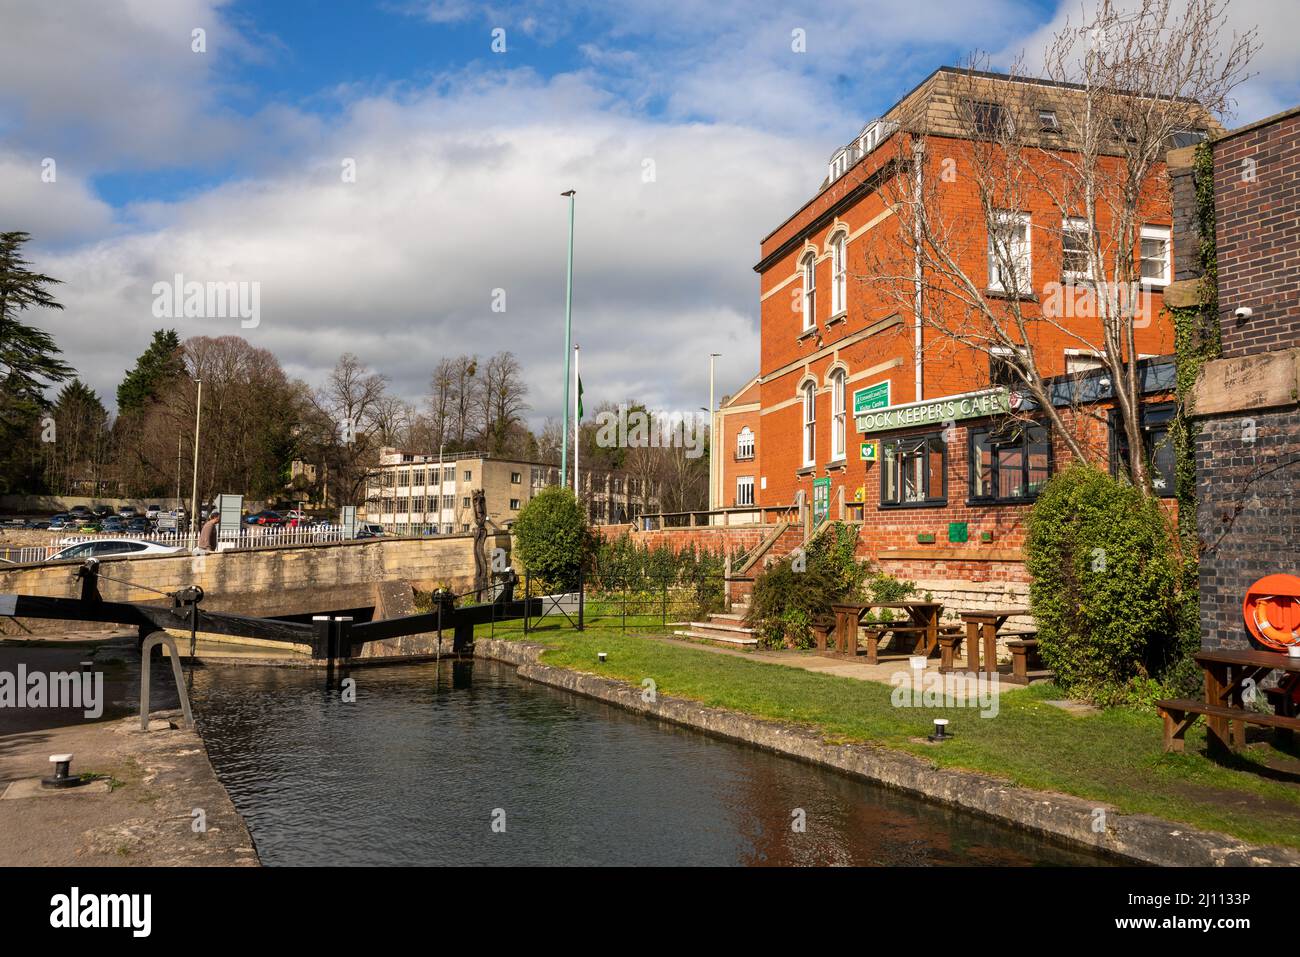 Wallbridge Lock on the Stroudwater canal in Stroud, England, United Kingdom Stock Photo